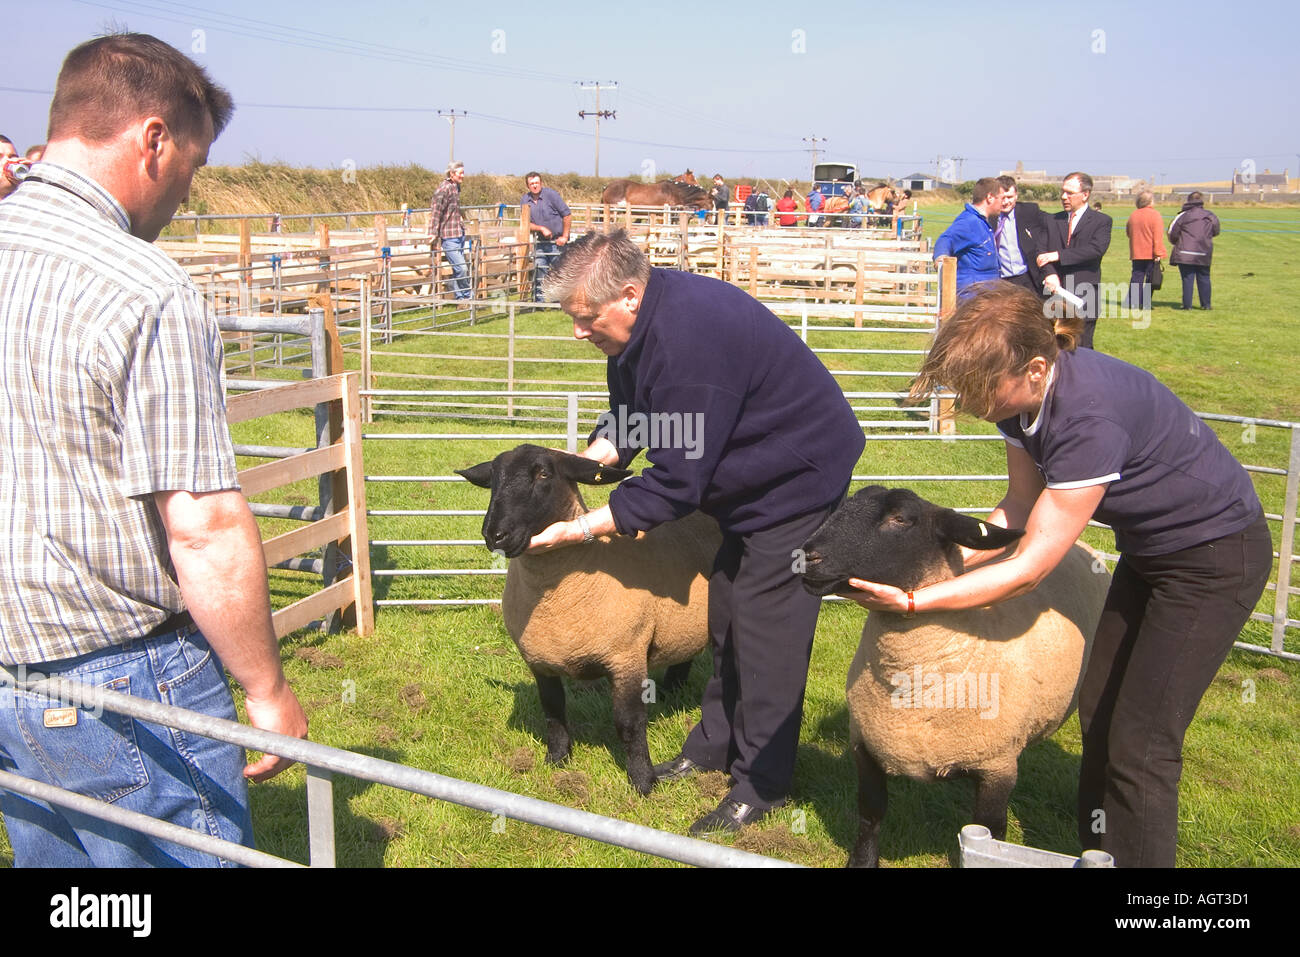 dh Annual Show SHAPINSAY ORKNEY Judge judging pair of Suffolk gimmer sheep at agricultural show ram people Stock Photo